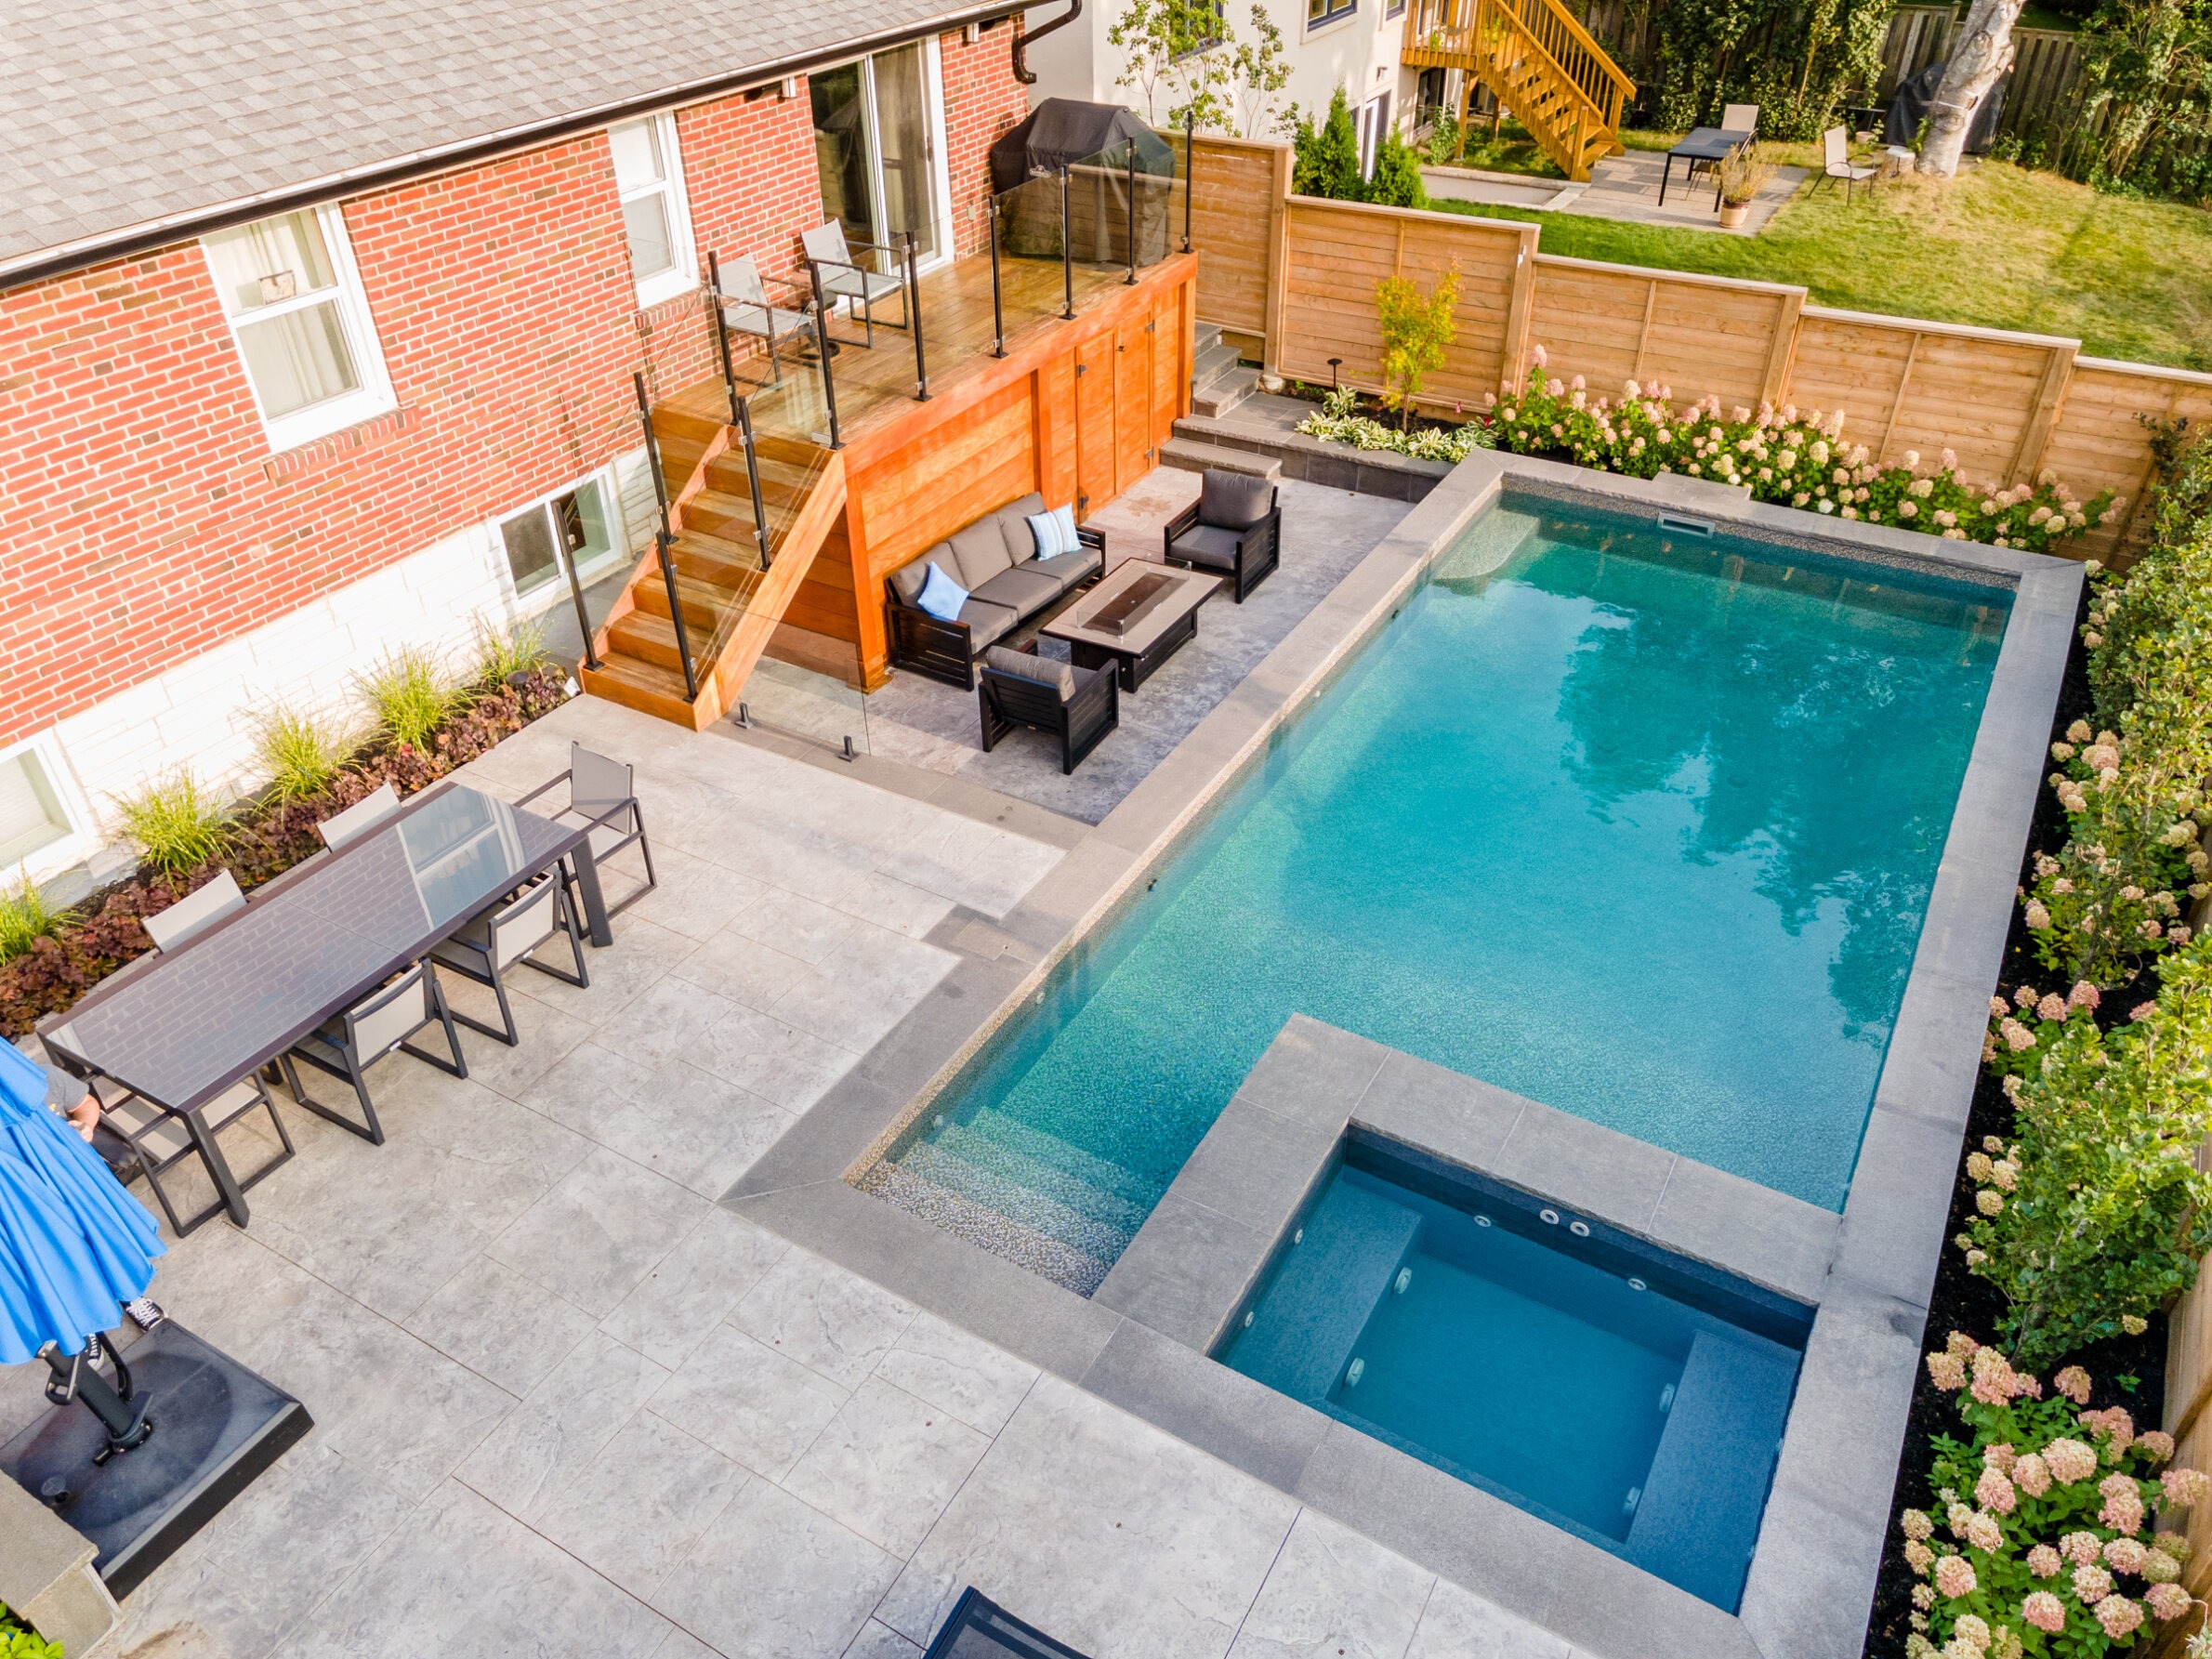 Aerial view of a backyard with a rectangular swimming pool, hot tub, patio area with furniture, lawn, and a person standing by the table.